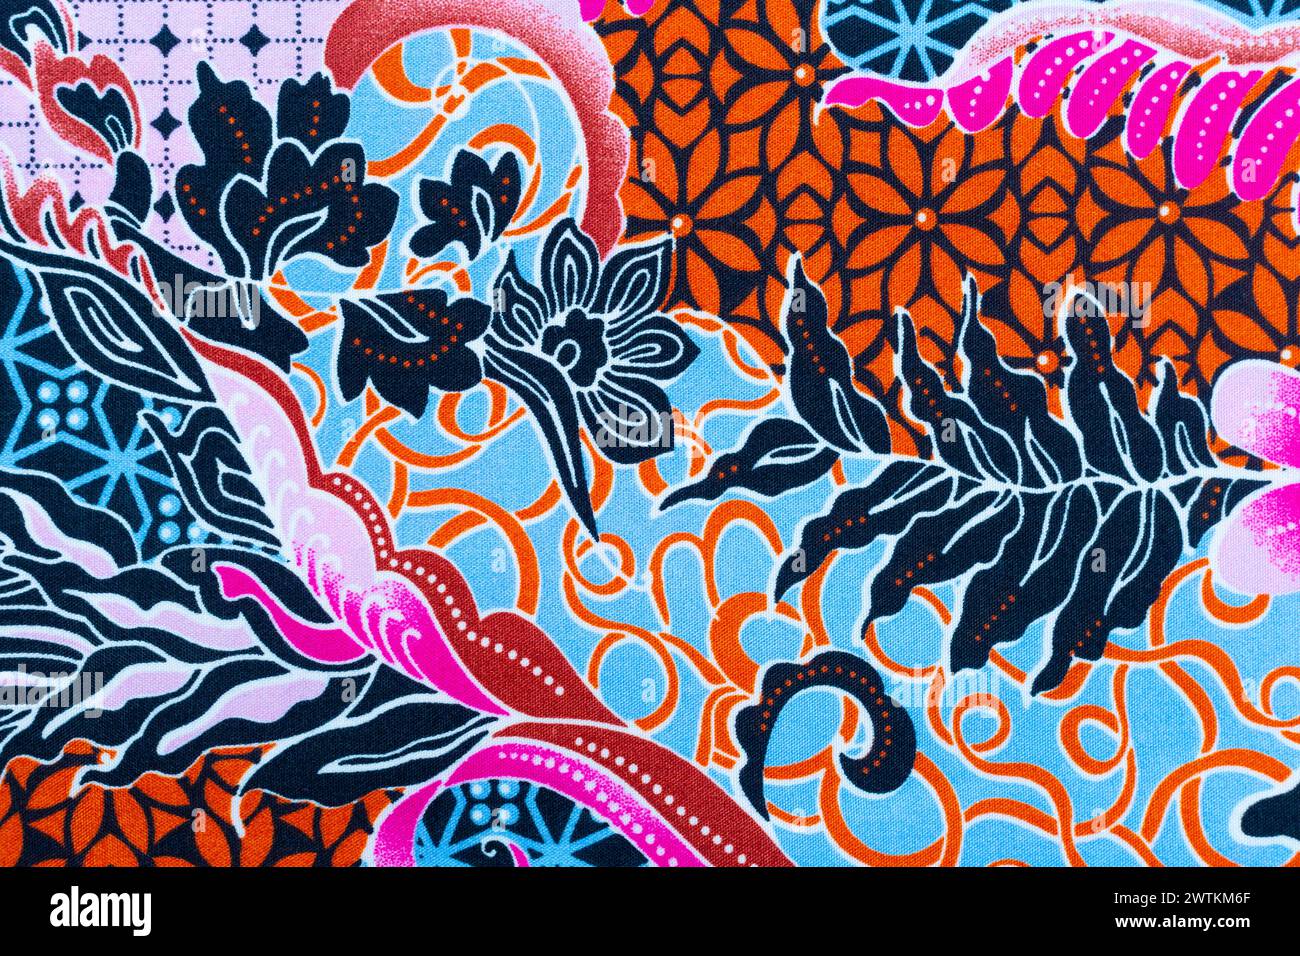 Detail of a batik design from Indonesia Stock Photo